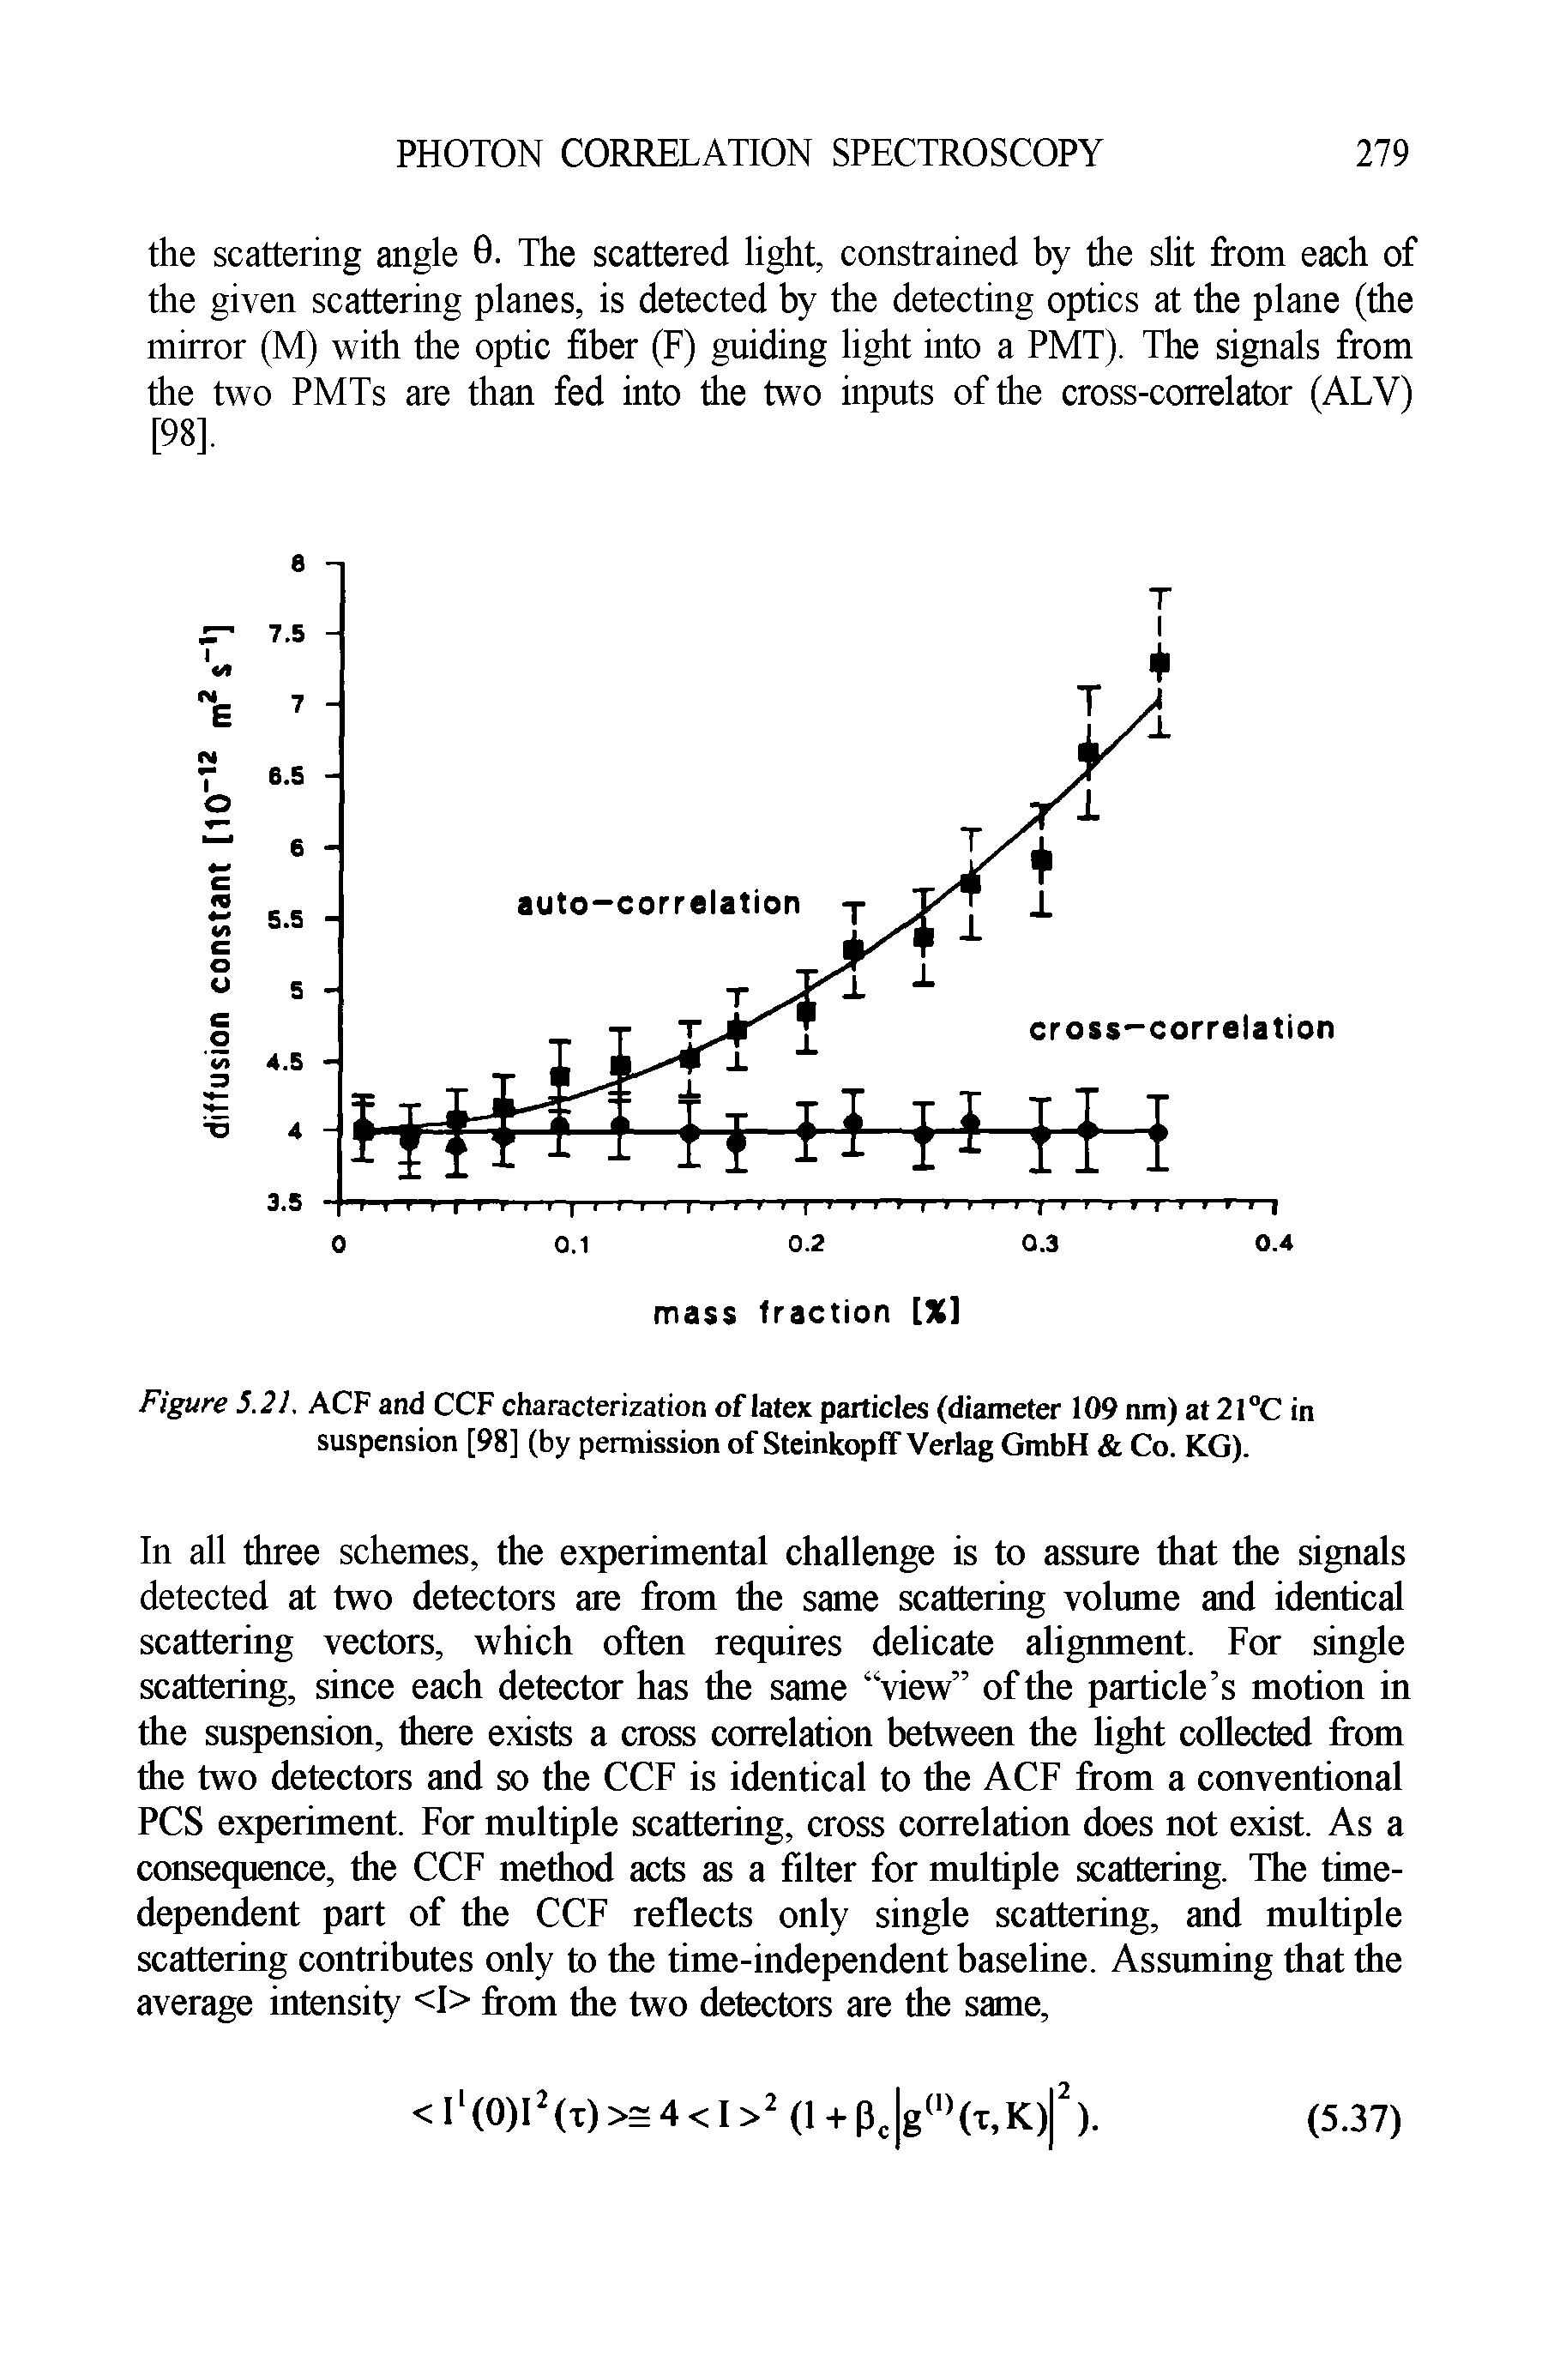 Figure J.2AACFandCCF characterization of latex particles (diameter 109 nm) at 21 C in suspension [98] (by permission of Steinkopff Verlag GmbH Co. KG).